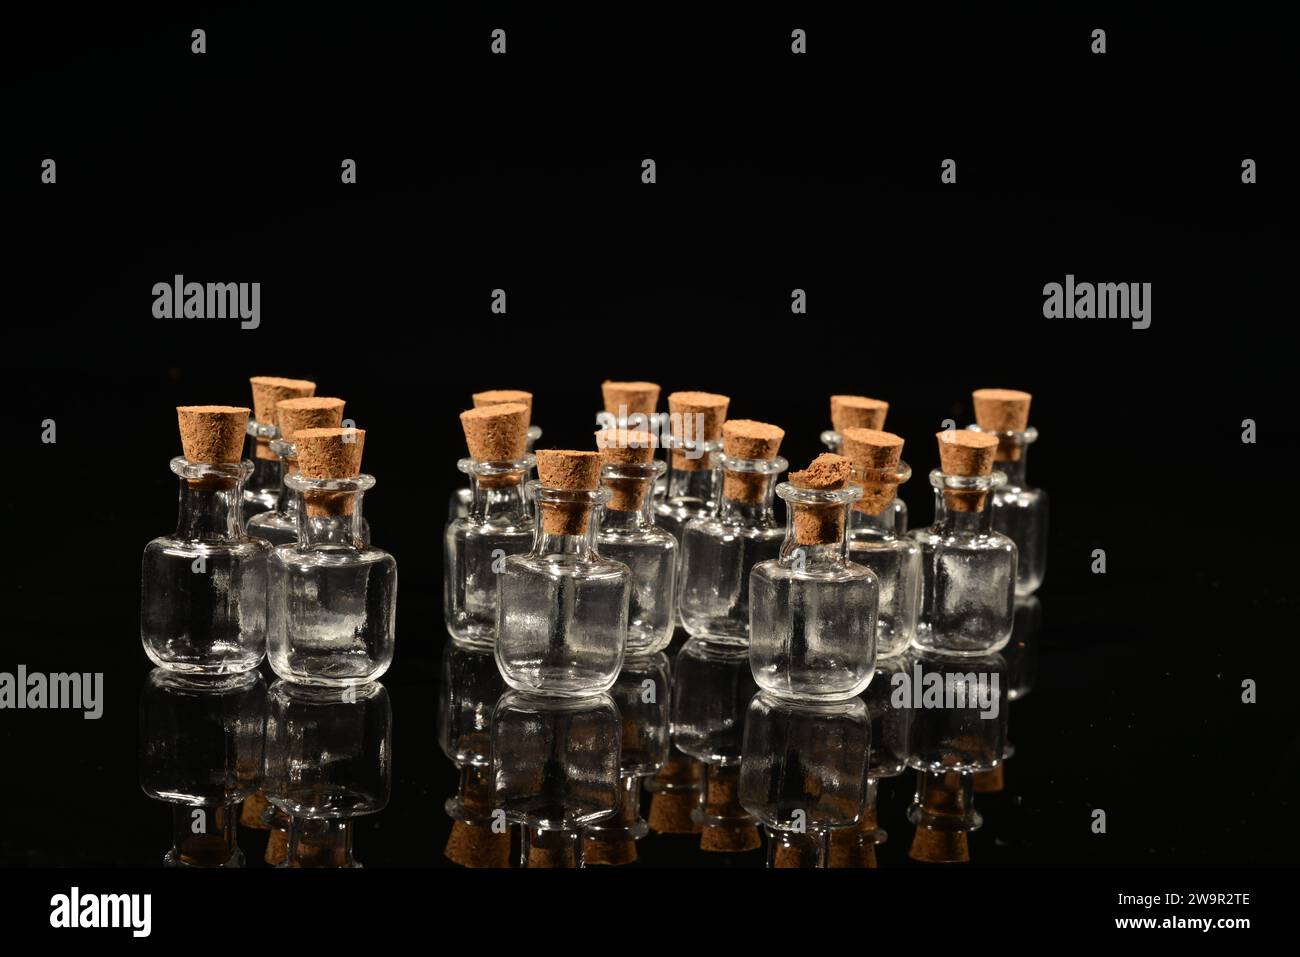 Glass bottles with cork on a black mirror surface with reflections isolated on black background. Stock Photo